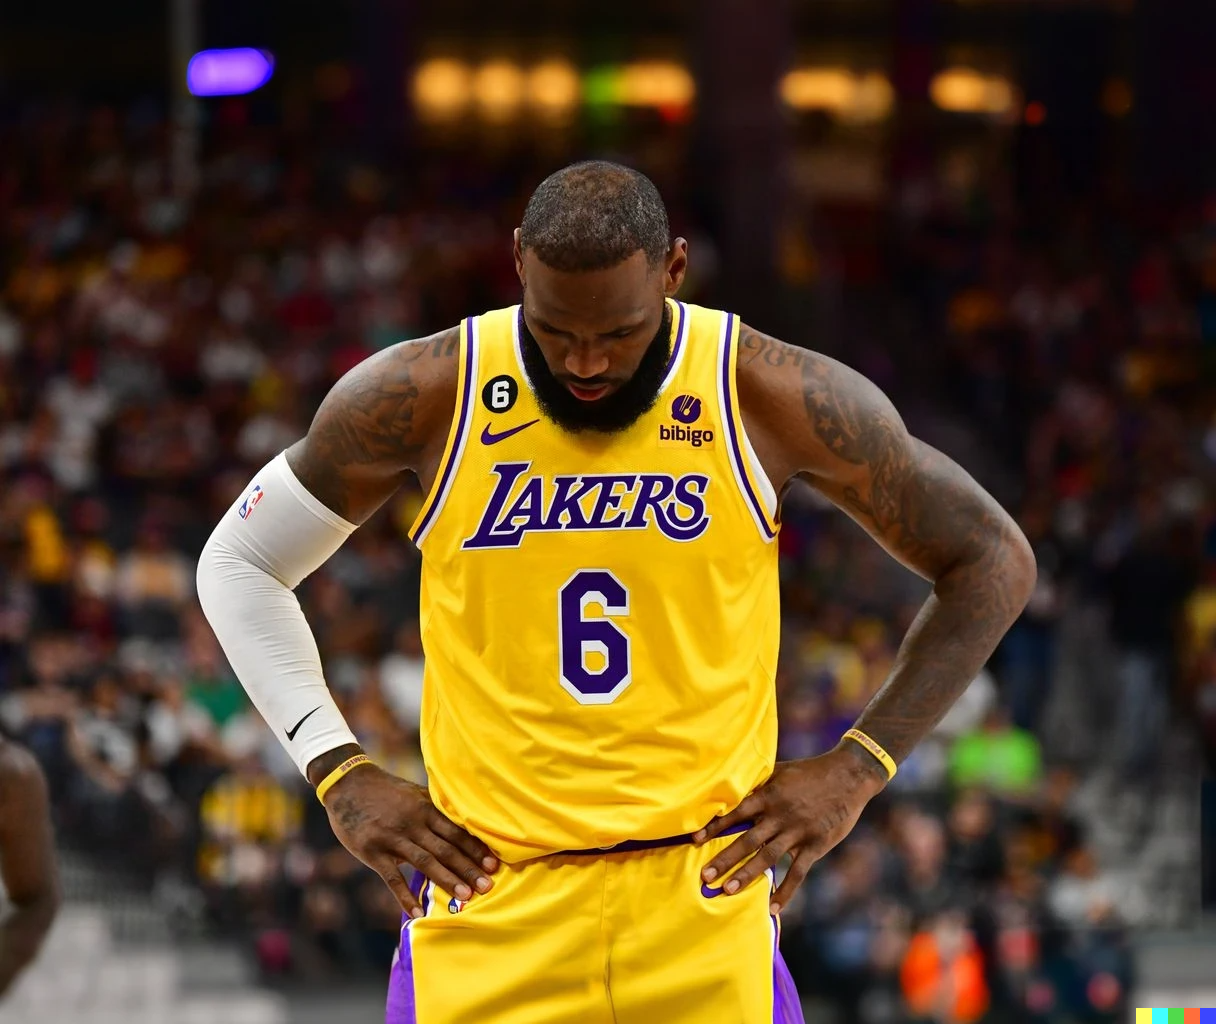 Los Angeles Lakers Is 2-9 in Their First 11 Games of the New NBA Season